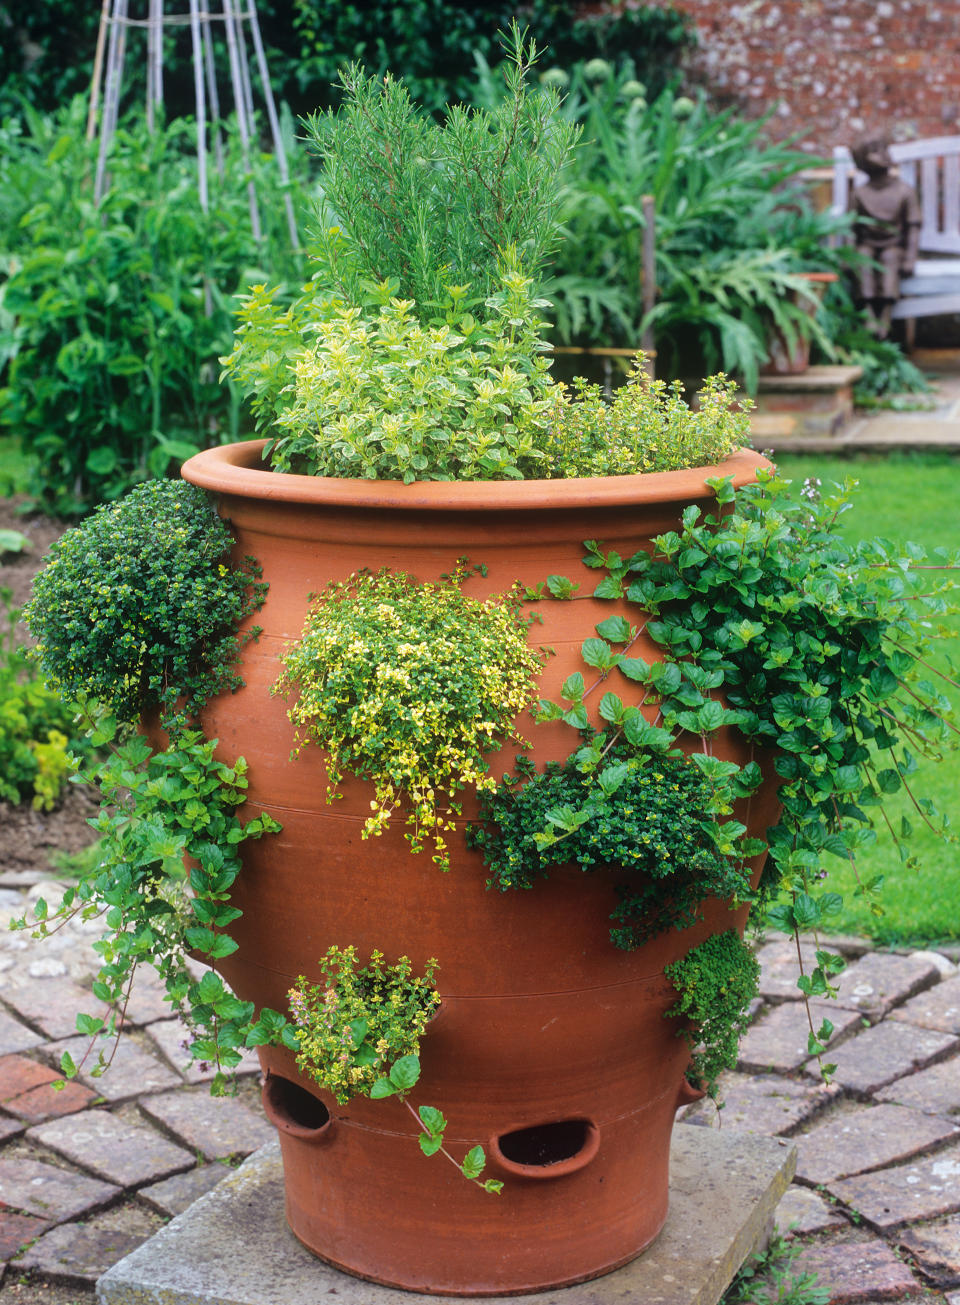 <p> You needn&apos;t have a large space to grow fruit, vegetables or herb. You can be creative with kitchen gardens and grow it all in one huge pot, or in a series of container gardening.&#xA0; </p> <p> &apos;If you are a beginner to gardening or have little time for maintaining a garden, herb garden ideas are simple and satisfying,&apos; says <em>Homes &amp; Gardens</em>&apos; garden editor Rachel Crow. &apos;You can grow enough in a container like the one above, in a window planter or even indoors.&apos; </p>